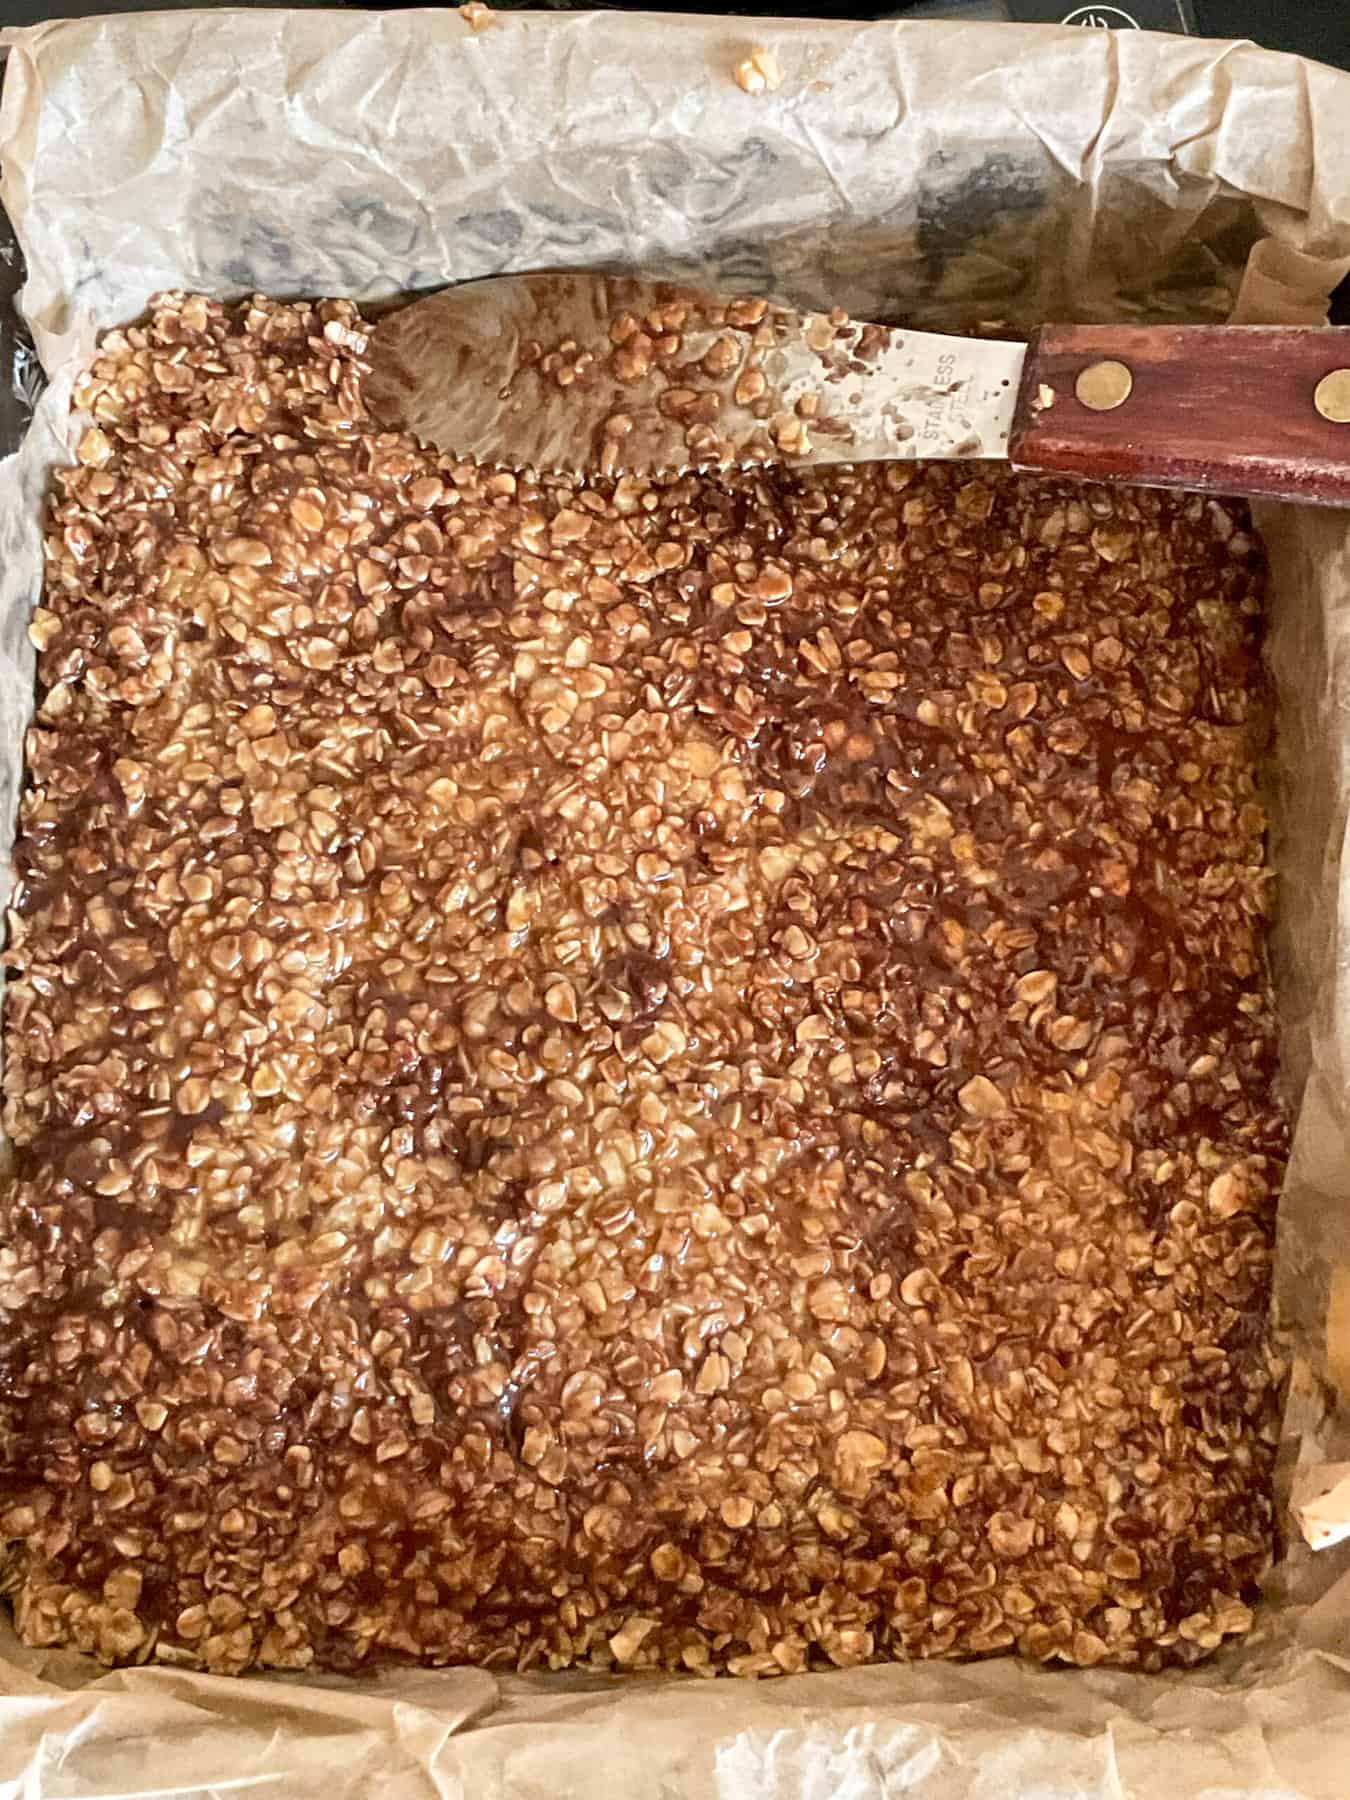 Chocolate flapjack mixture pressed into baking tray with a small wooden handled spatula.